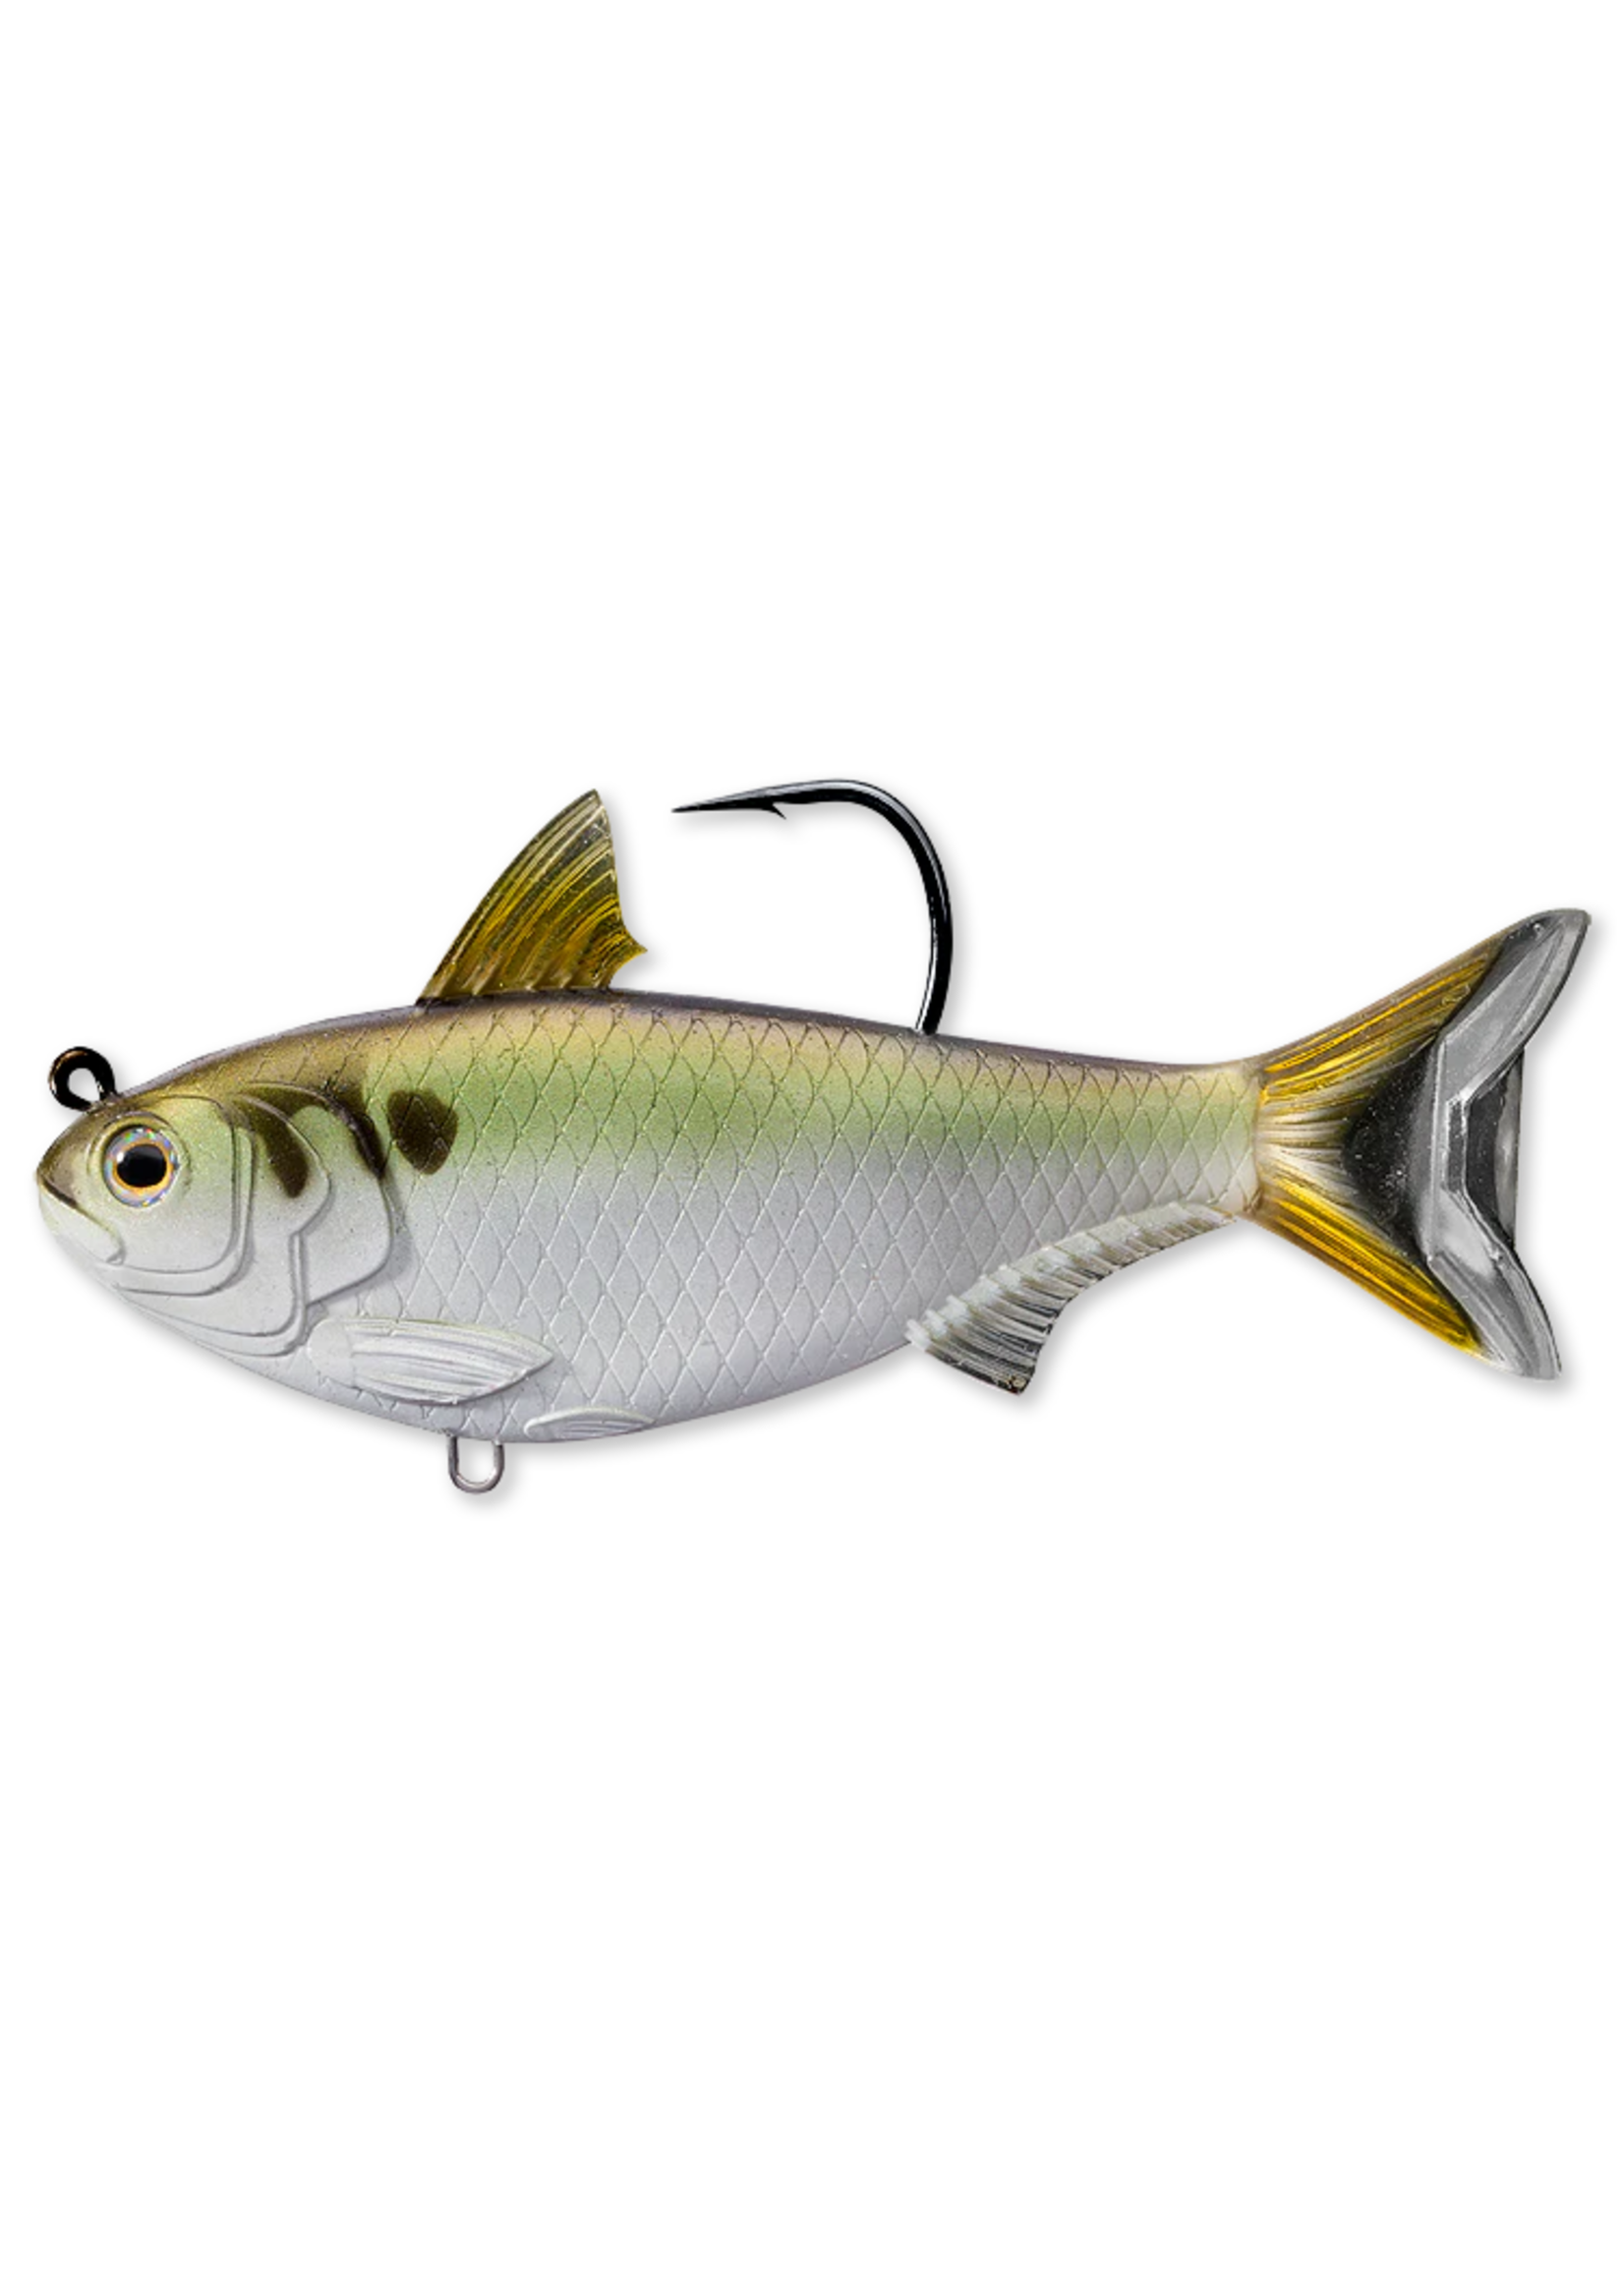 Live Target Live Target Gizzard Shad Swimbait